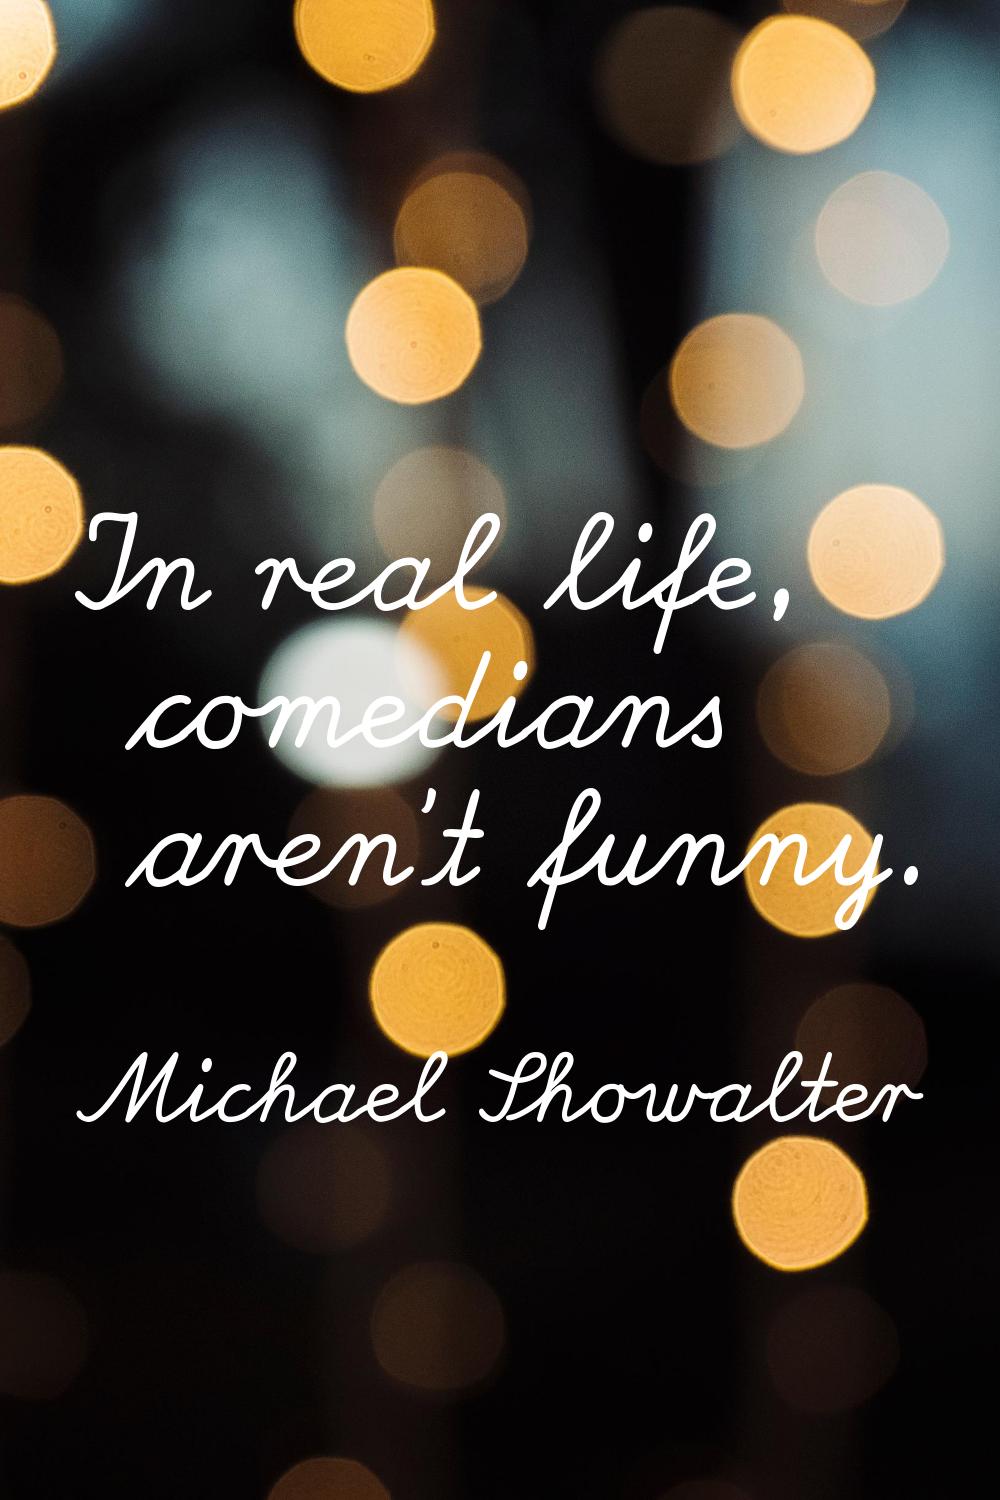 In real life, comedians aren't funny.